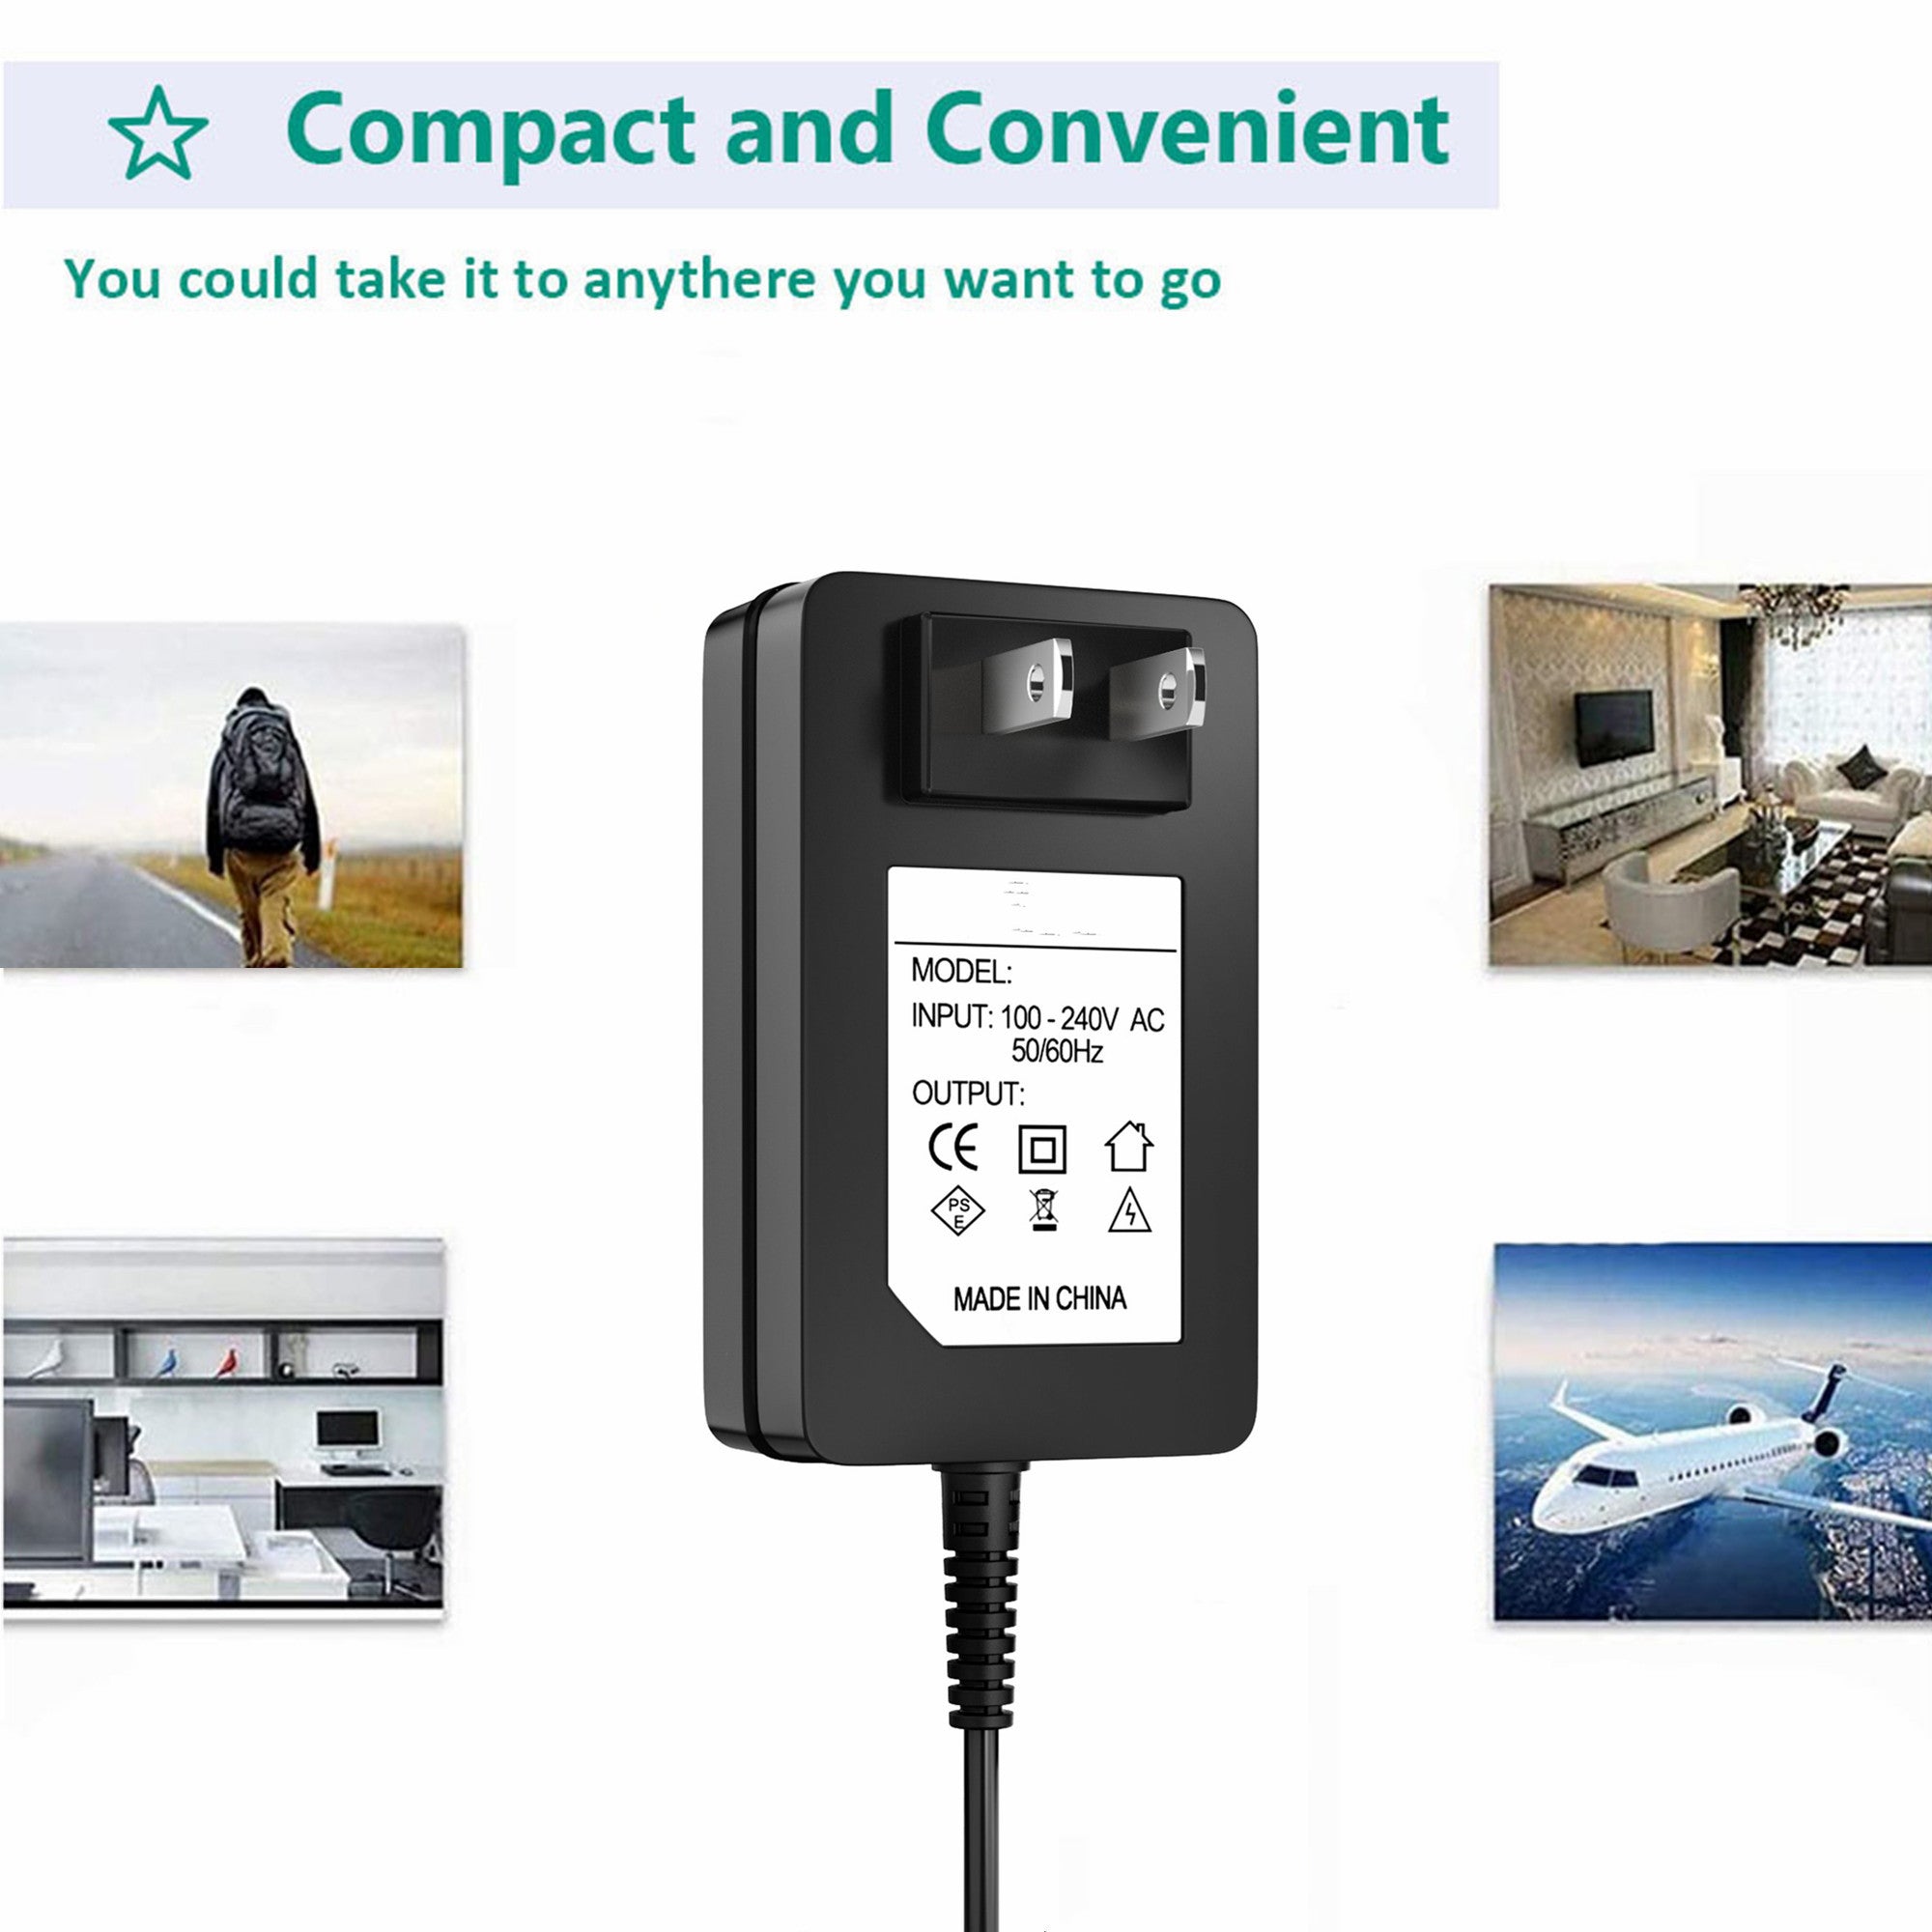 AbleGrid AC Adapter 16.5V 2A Power Charger Compatible with Home Hands-Free Personal Assistant